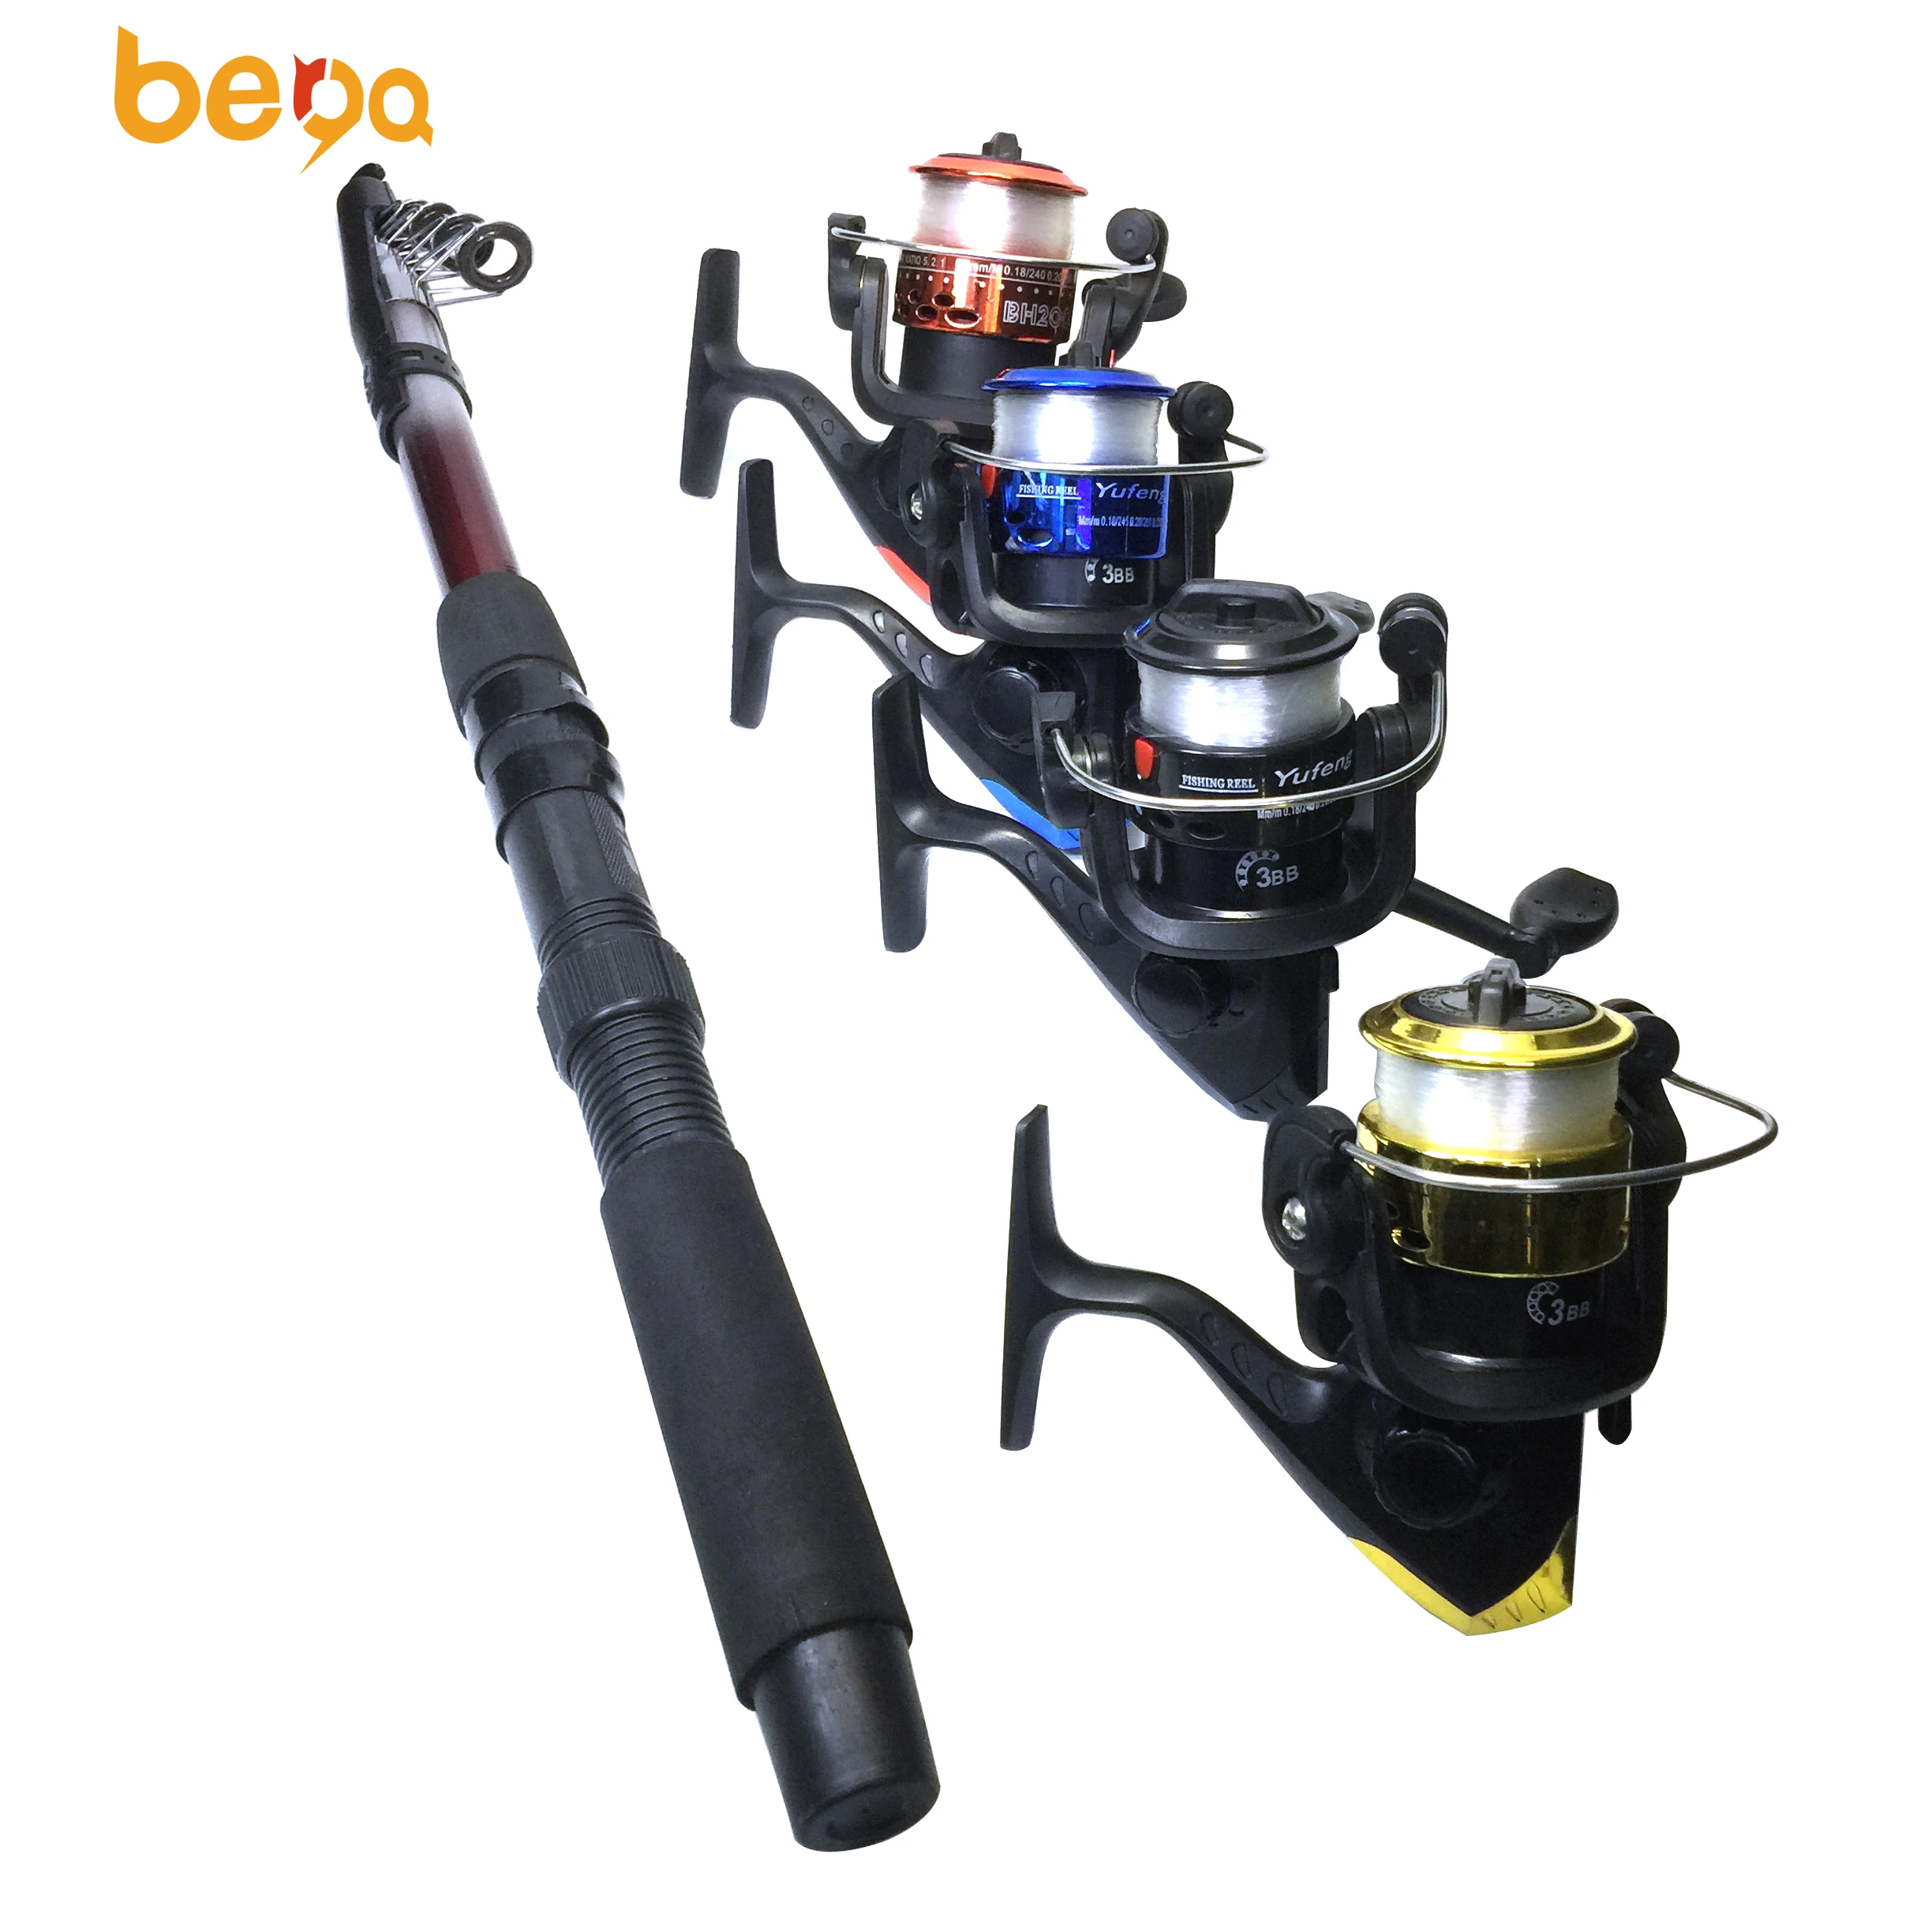 

Simple new Spinning Telescopic Fishing Rod and reel Combo Kit Set with Fishing floats and hooks fishing combo blister package, Black/white/red/yellow/orange, customizable